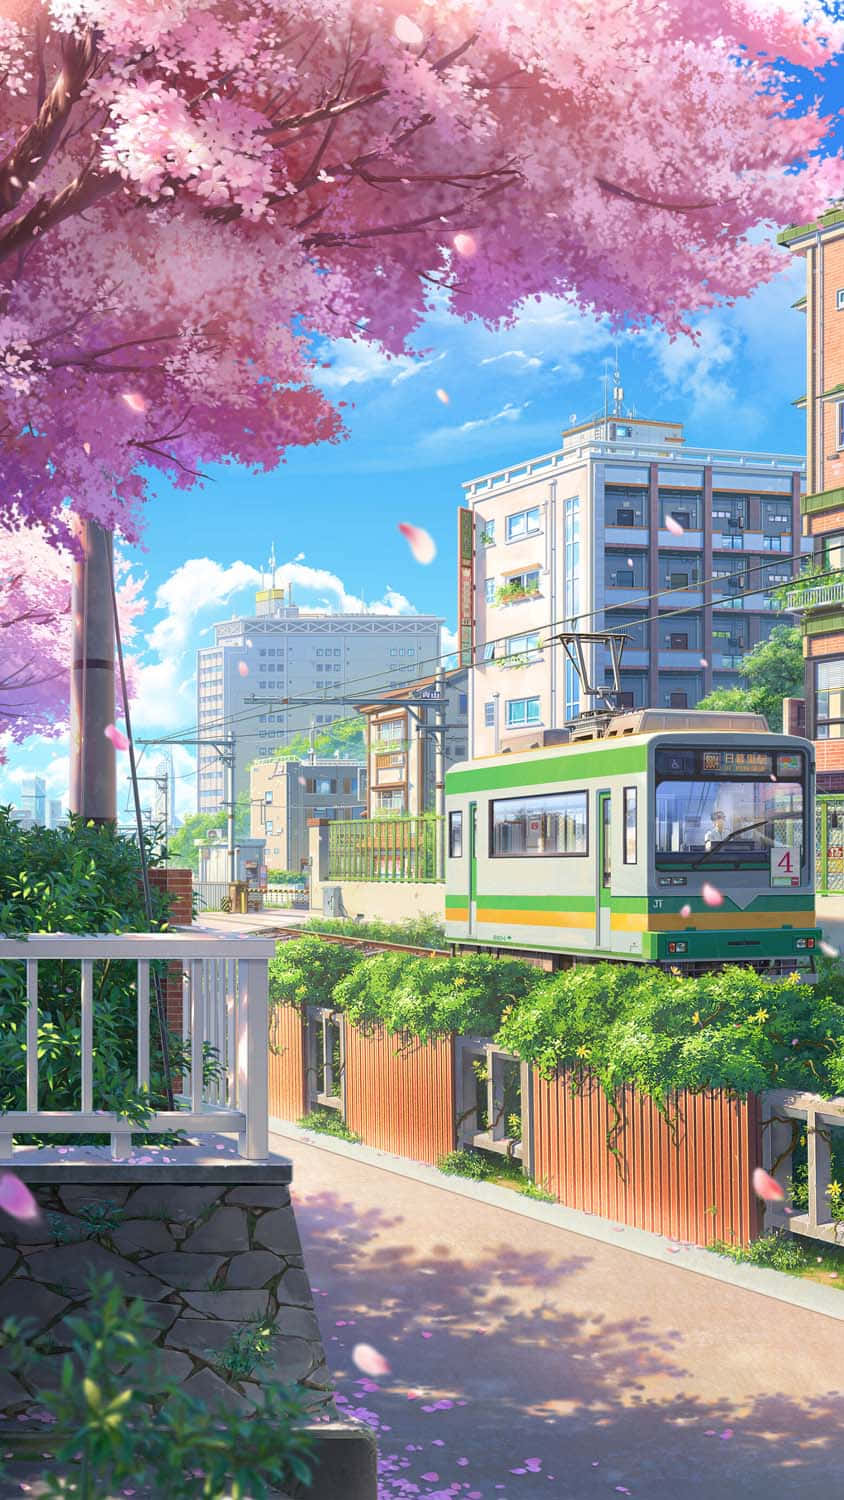 Download Tokyo Anime City With Cherry Blossom Tree Wallpaper |  